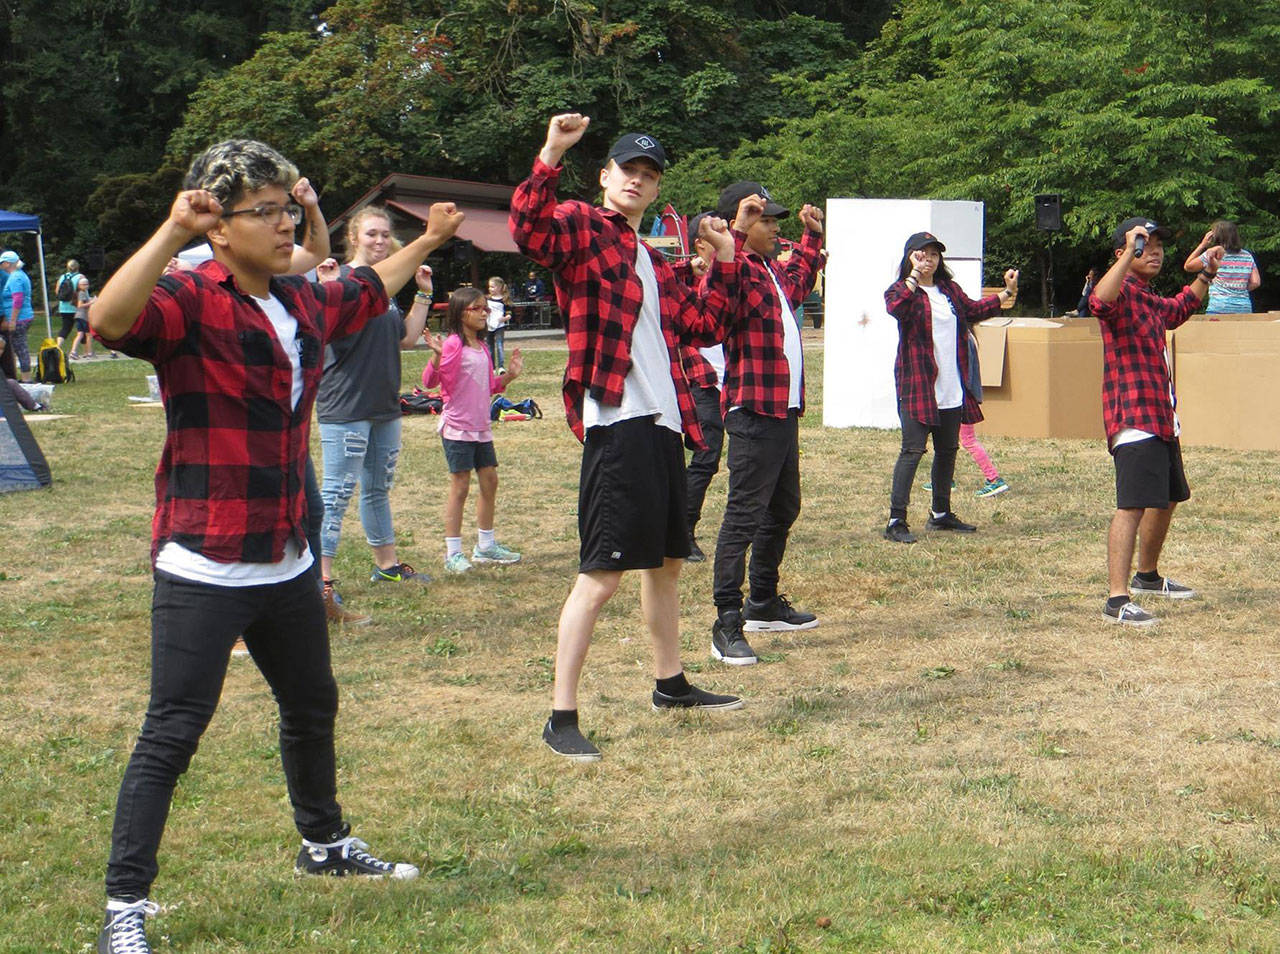 Kenmore Play Day features dancing, martial arts, football and more